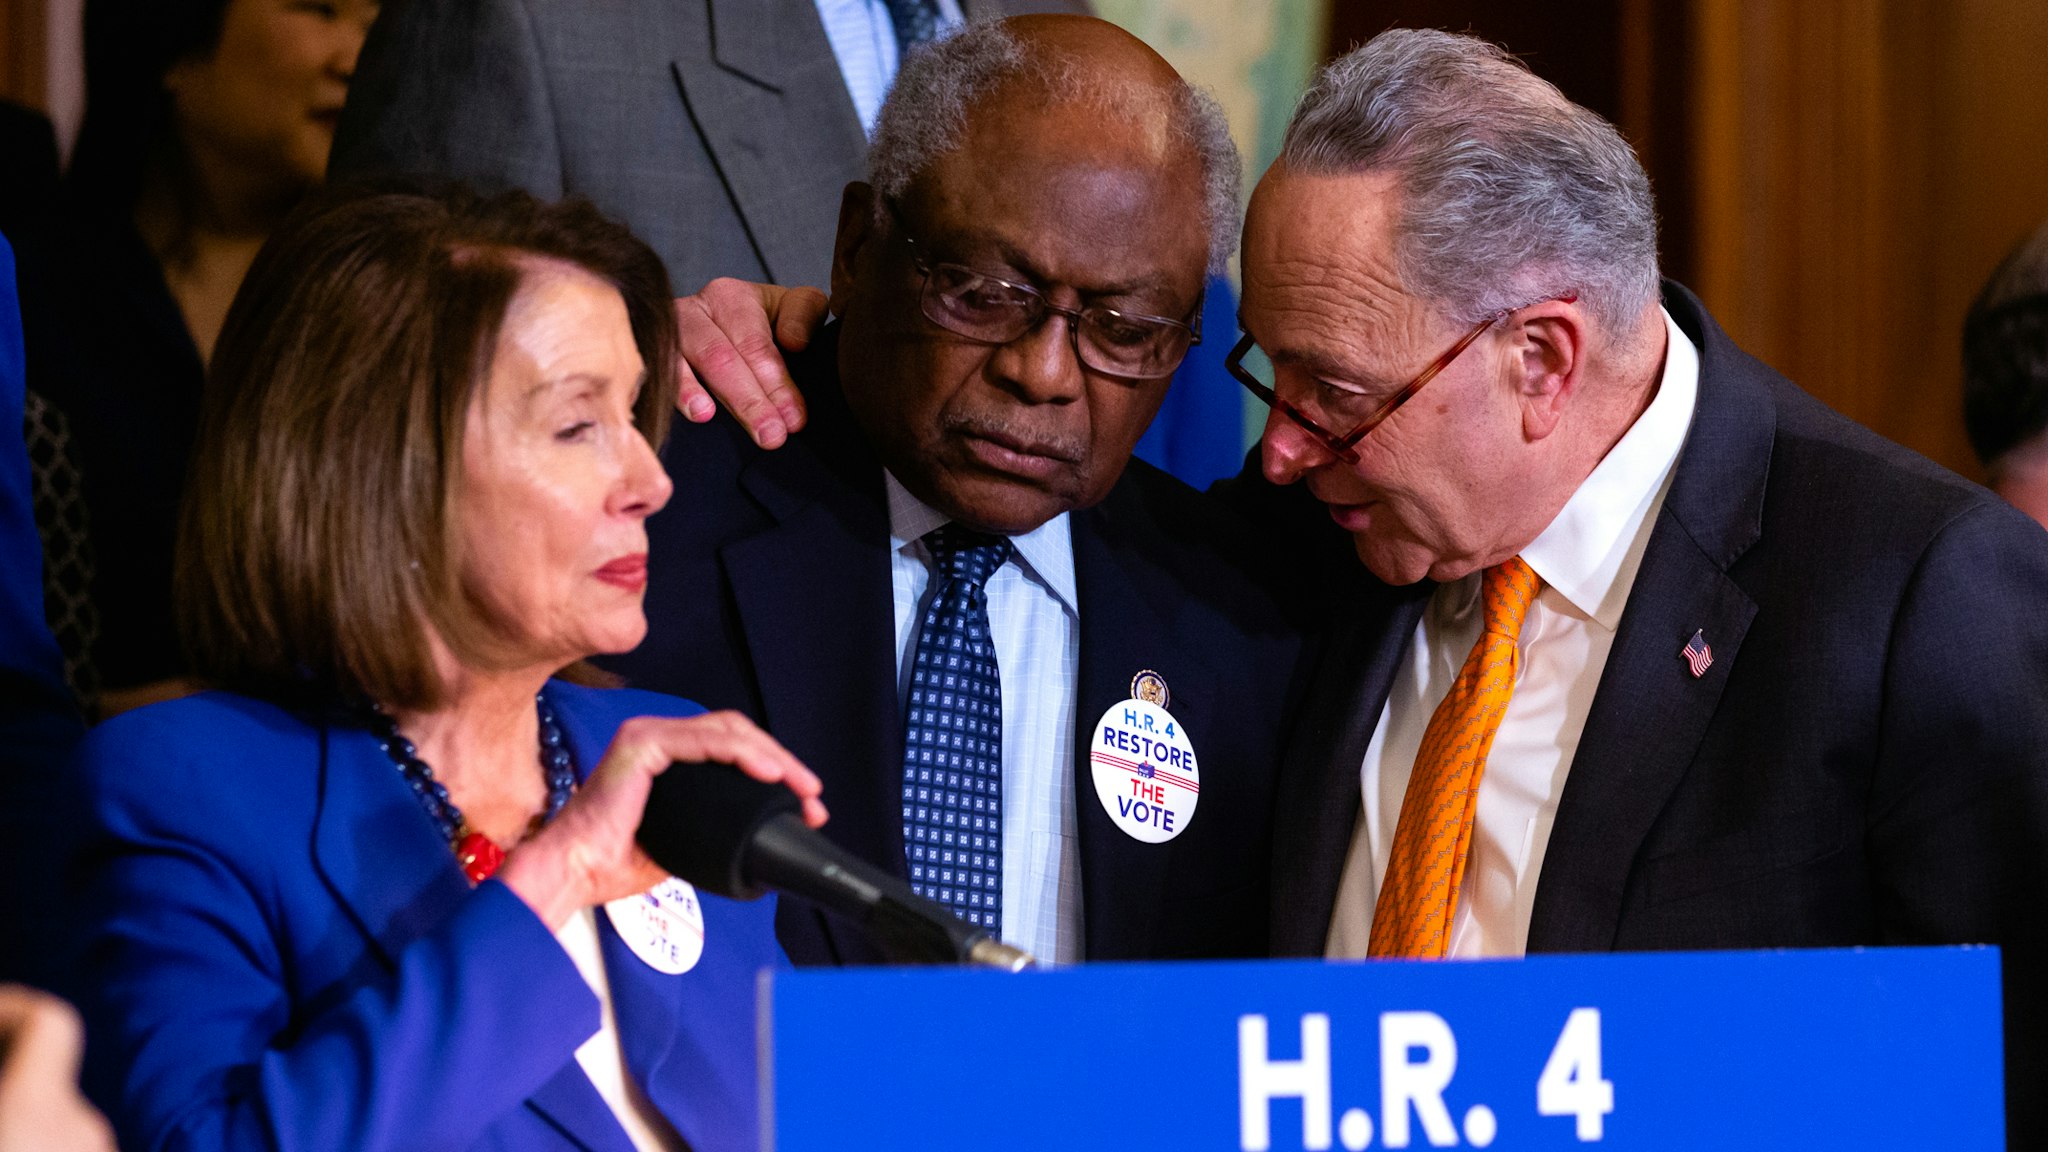 House Majority Whip James Clyburn (D-SC), (C), and Senate Minority Leader Sen. Chuck Schumer (D-NY), (R), speak before a news conference to introduce H.R. 4, Voting Rights Advancement Act, on Capitol Hill in Washington, DC, on Tuesday, Feb. 26, 2019.